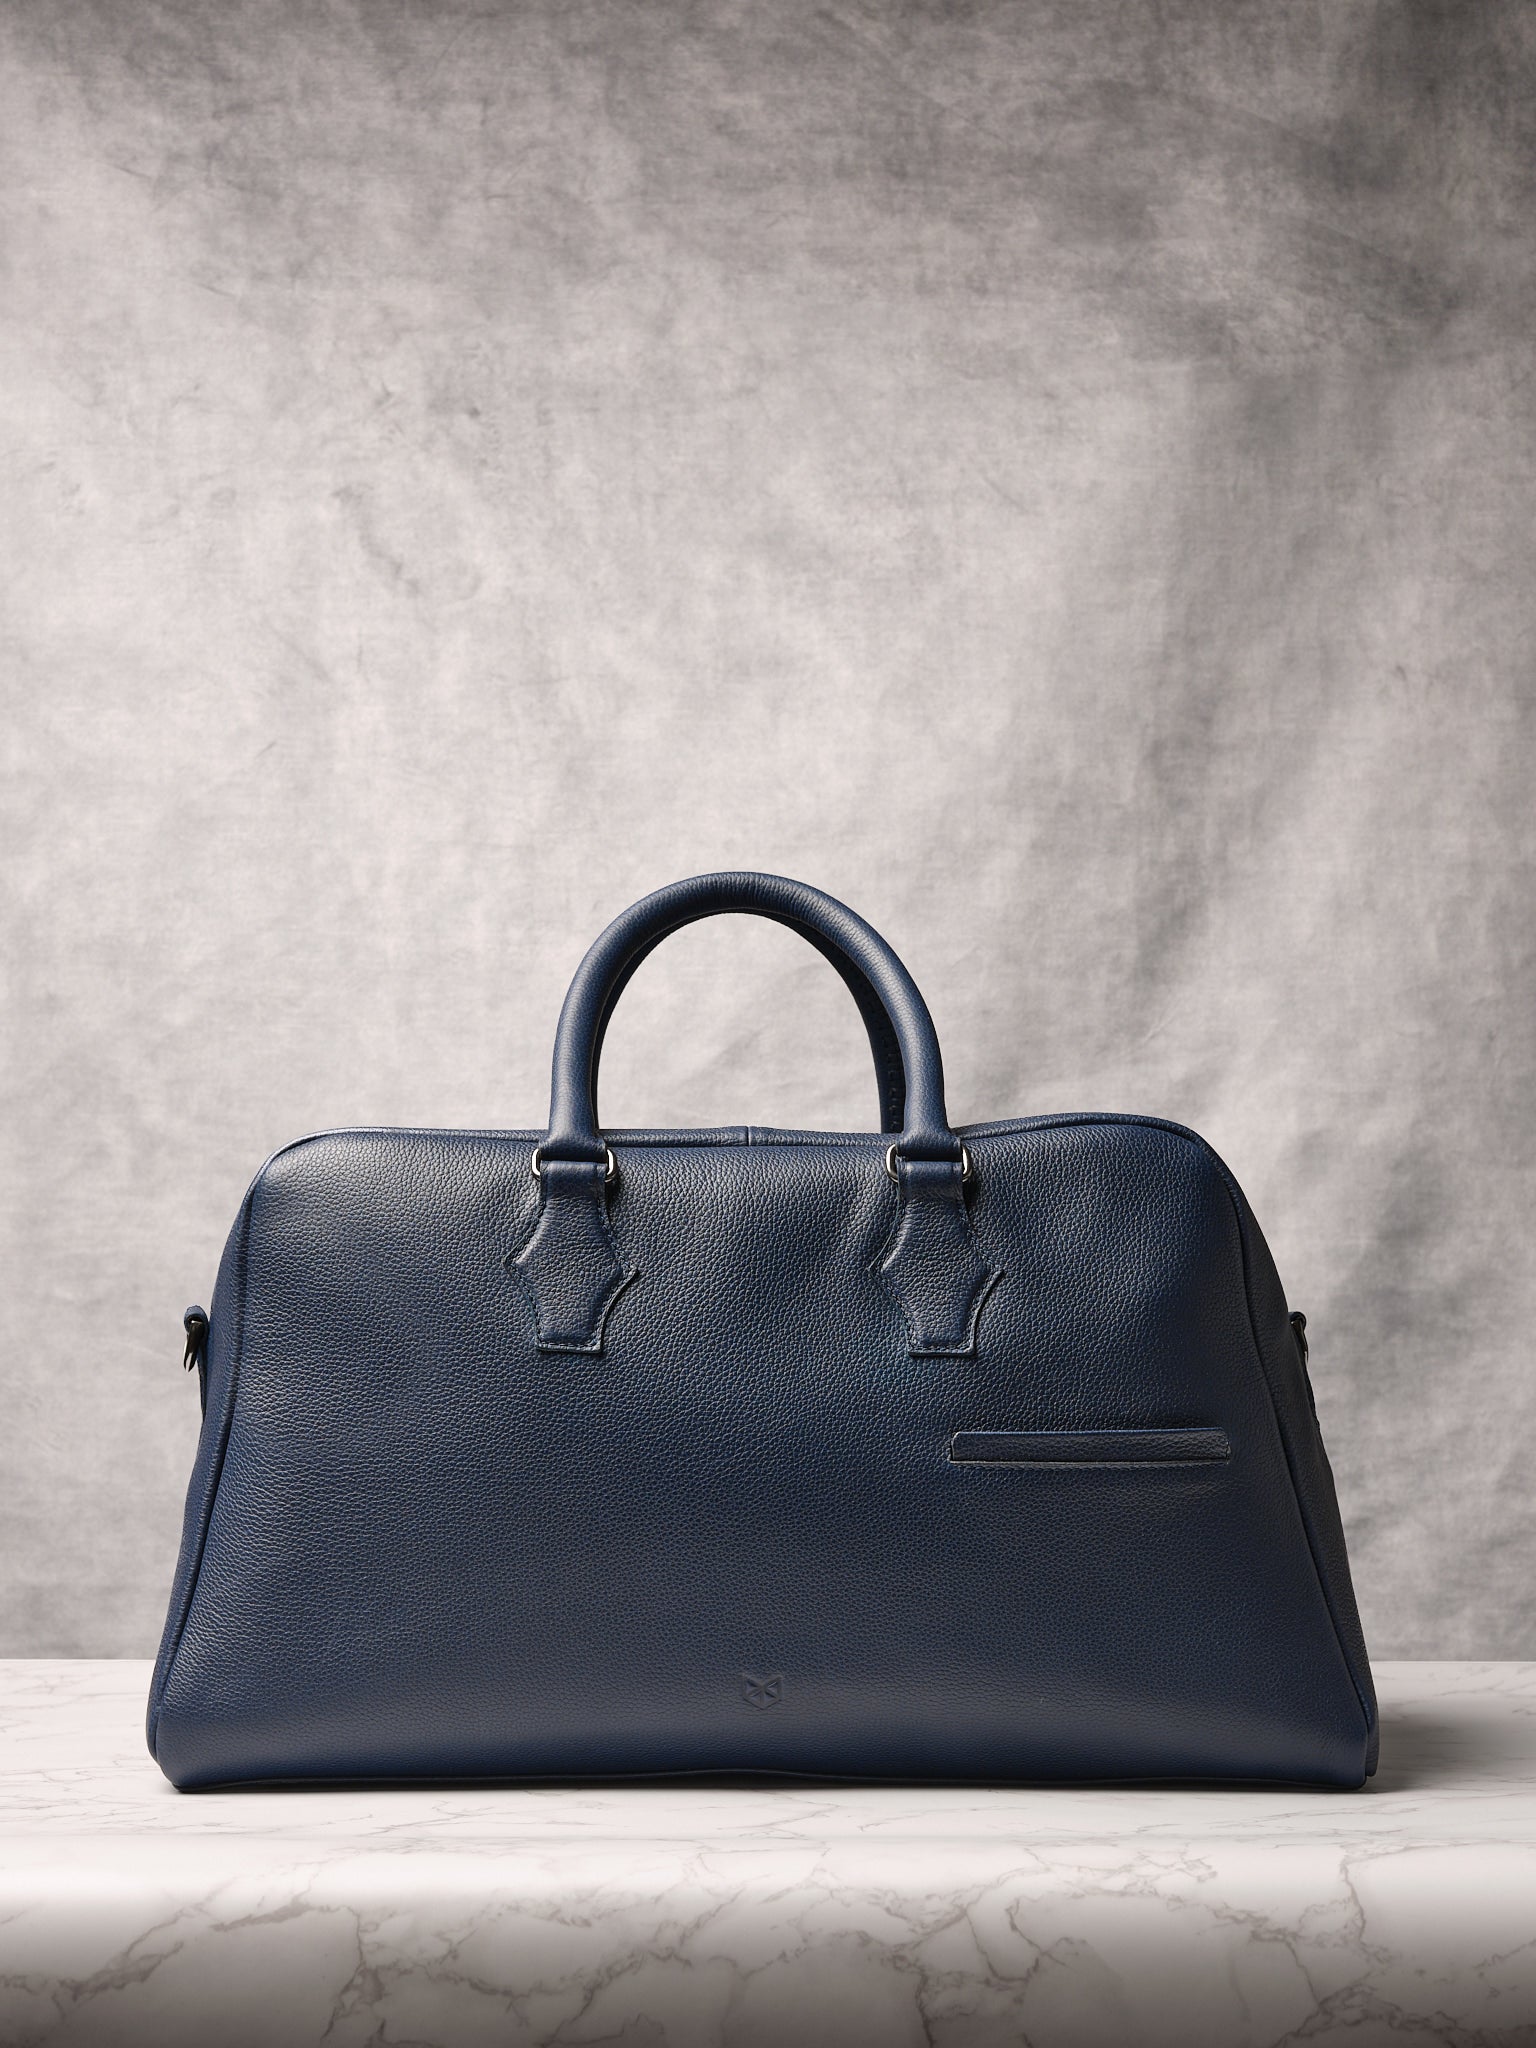 Weekend Travel Bag. Duffle Bags for Men Navy by Capra Leather